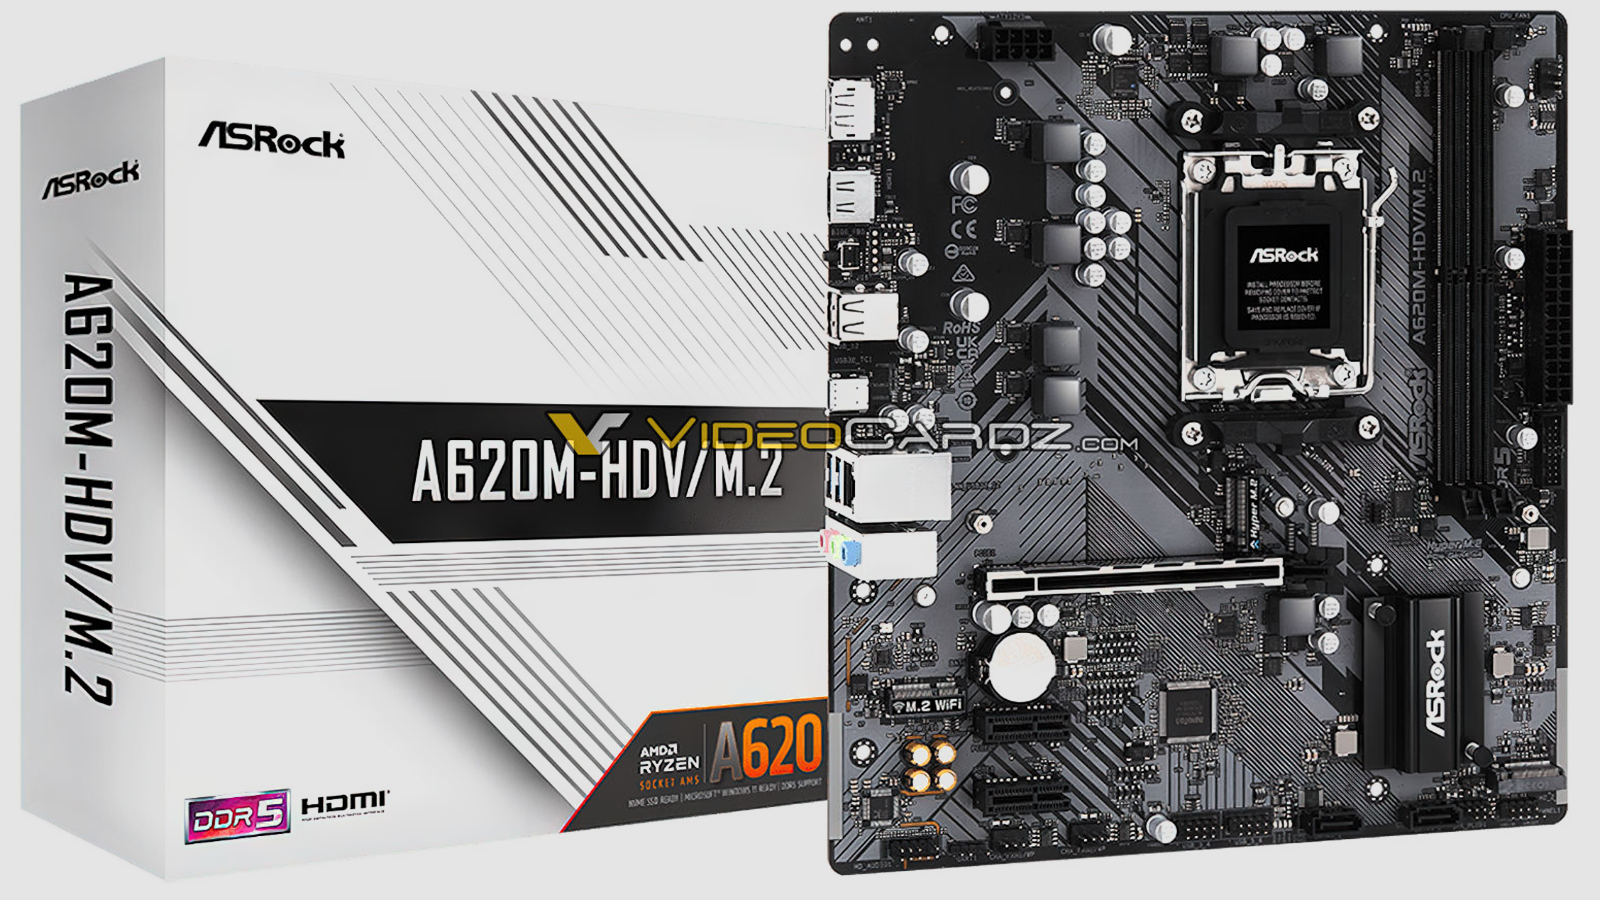 ASRock s AMD A620 Based Motherboard Pictured Detailed